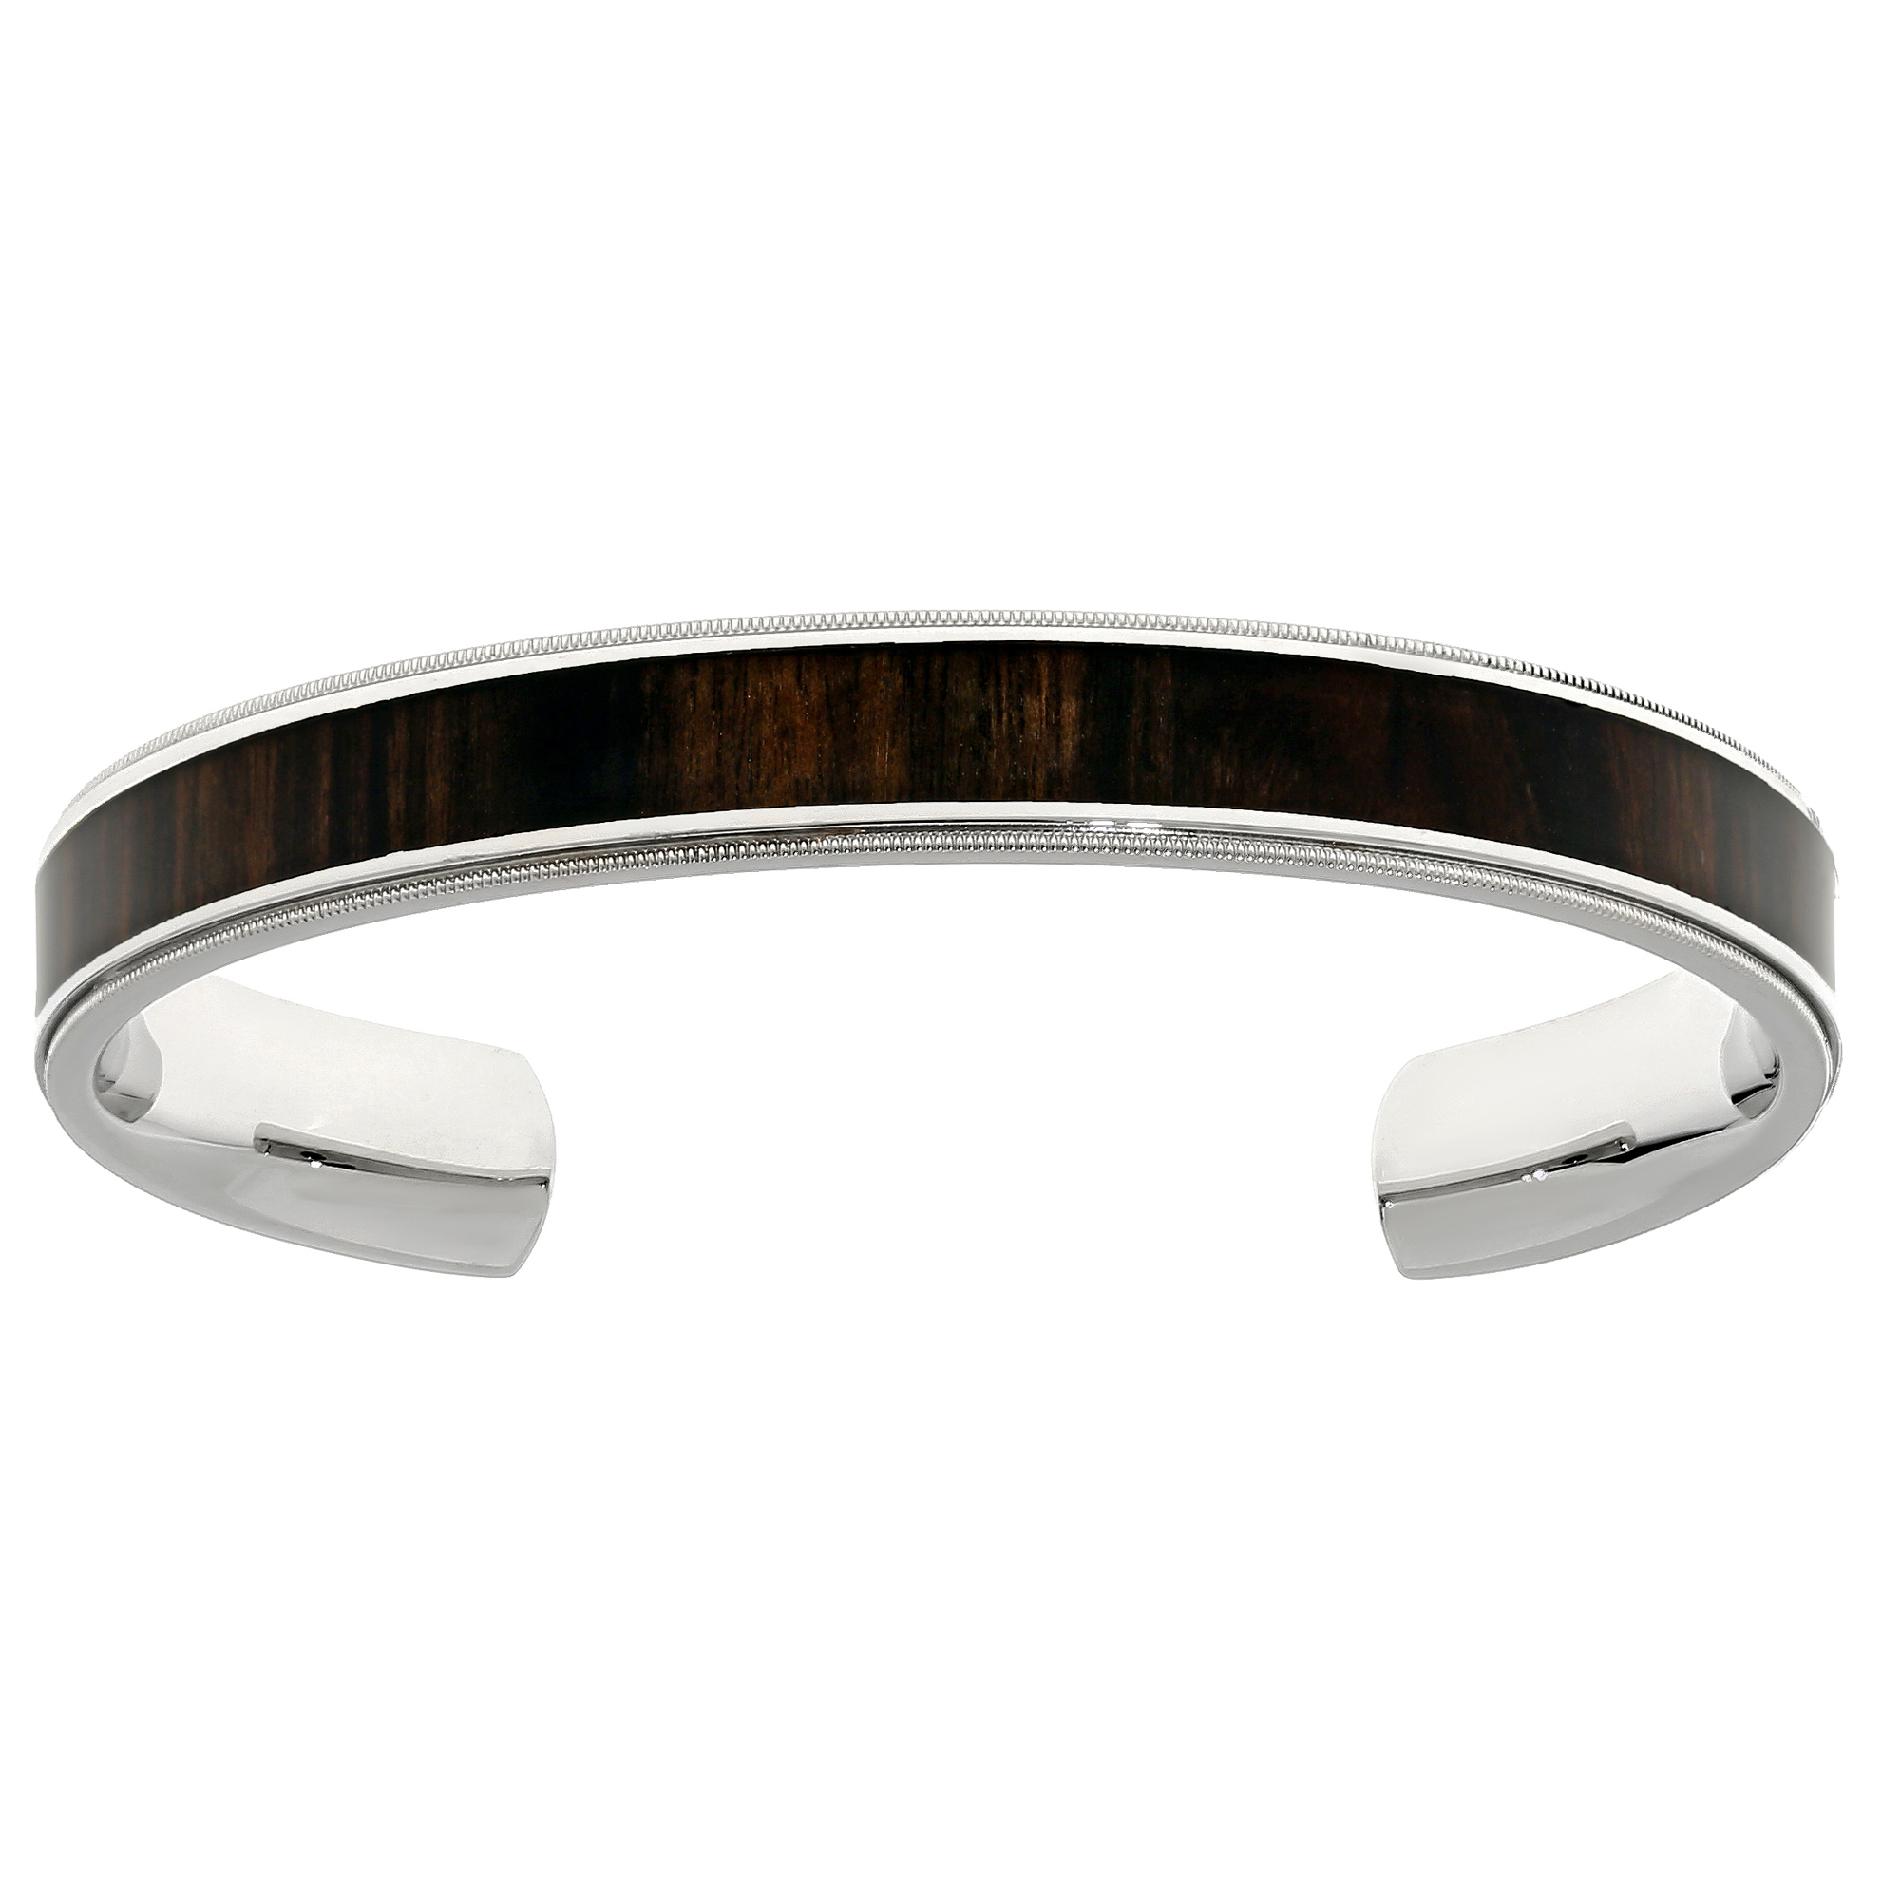 Stainless Steel Cuff Bangle with Dark Wooden Inlay